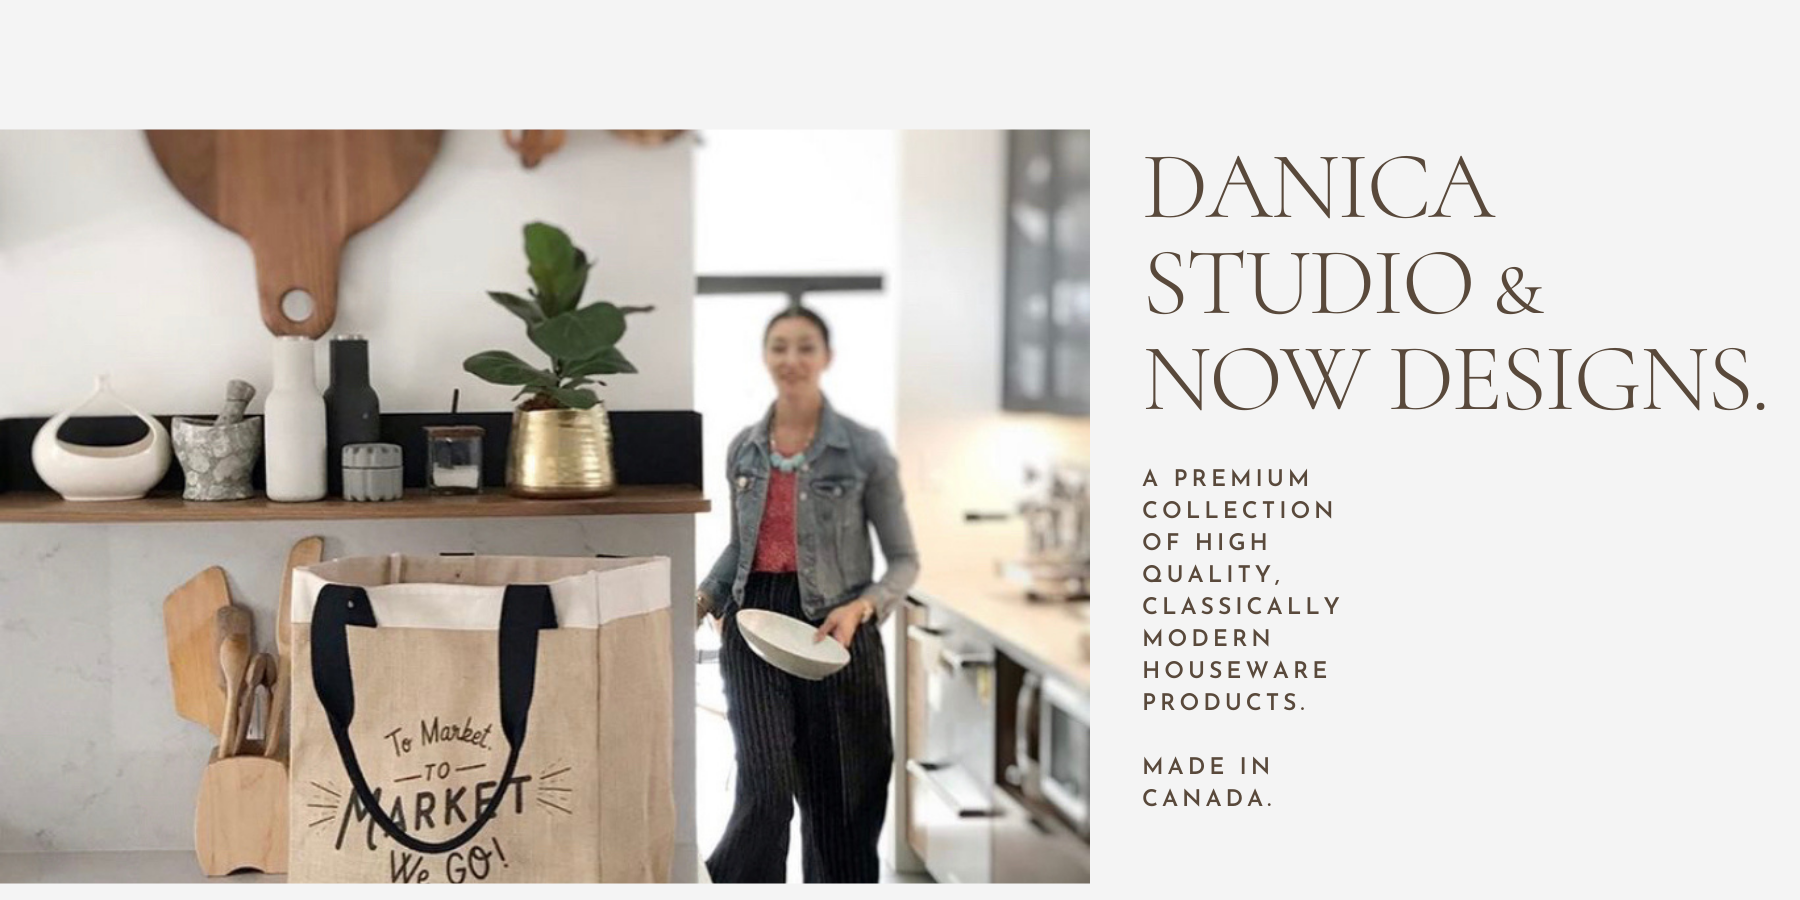 Danica Studio & Now Designs are our go-to suppliers for kitchen essentials & beautifully crafted housewares.